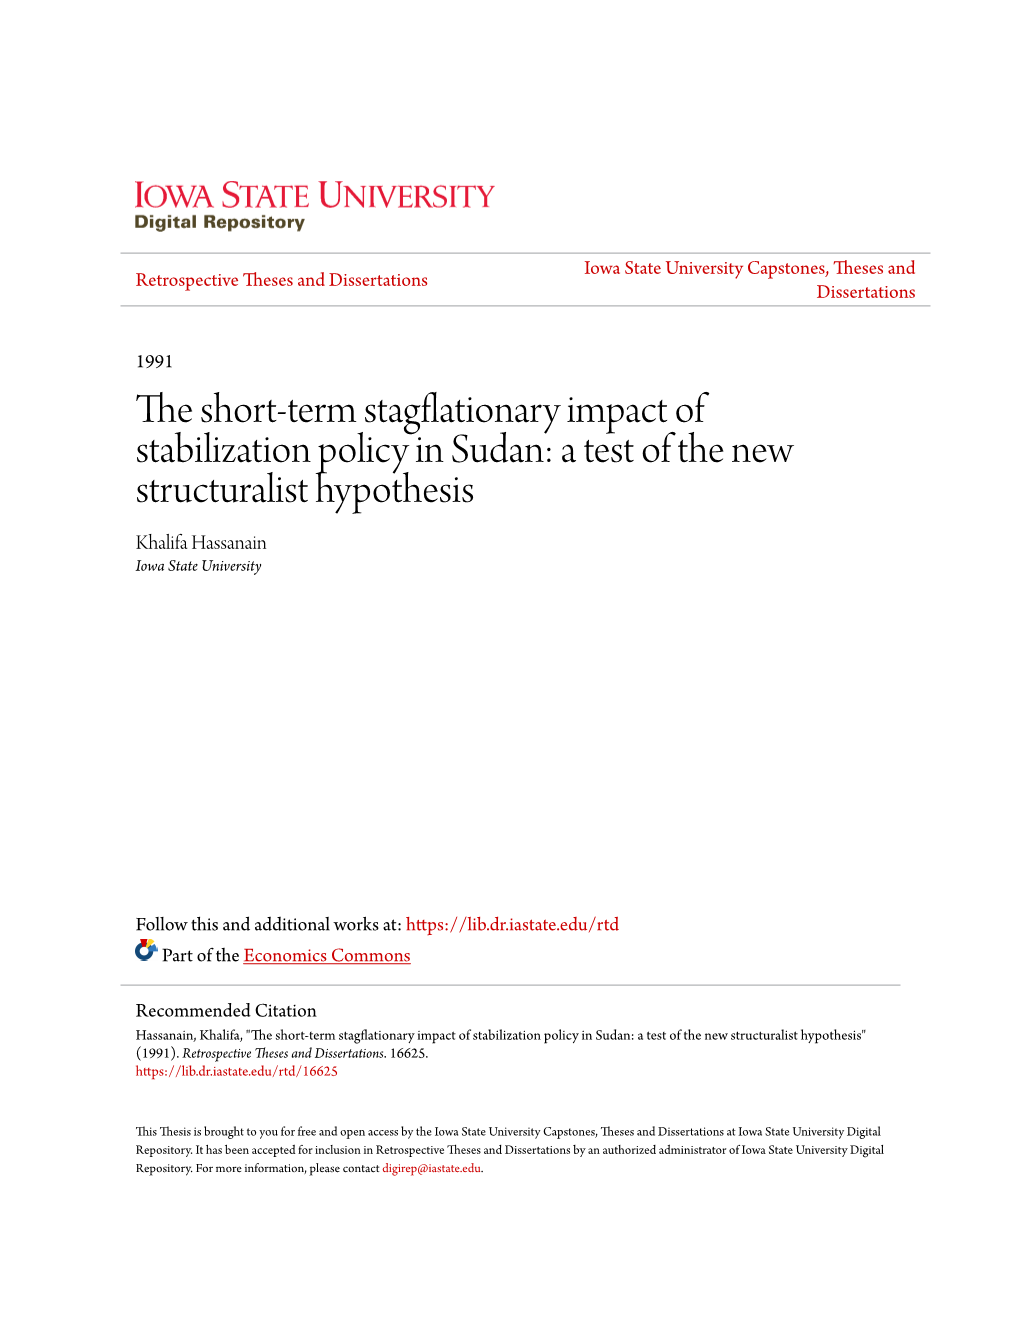 The Short-Term Stagflationary Impact of Stabilization Policy in Sudan: a Test of the New Structuralist Hypothesis Khalifa Hassanain Iowa State University